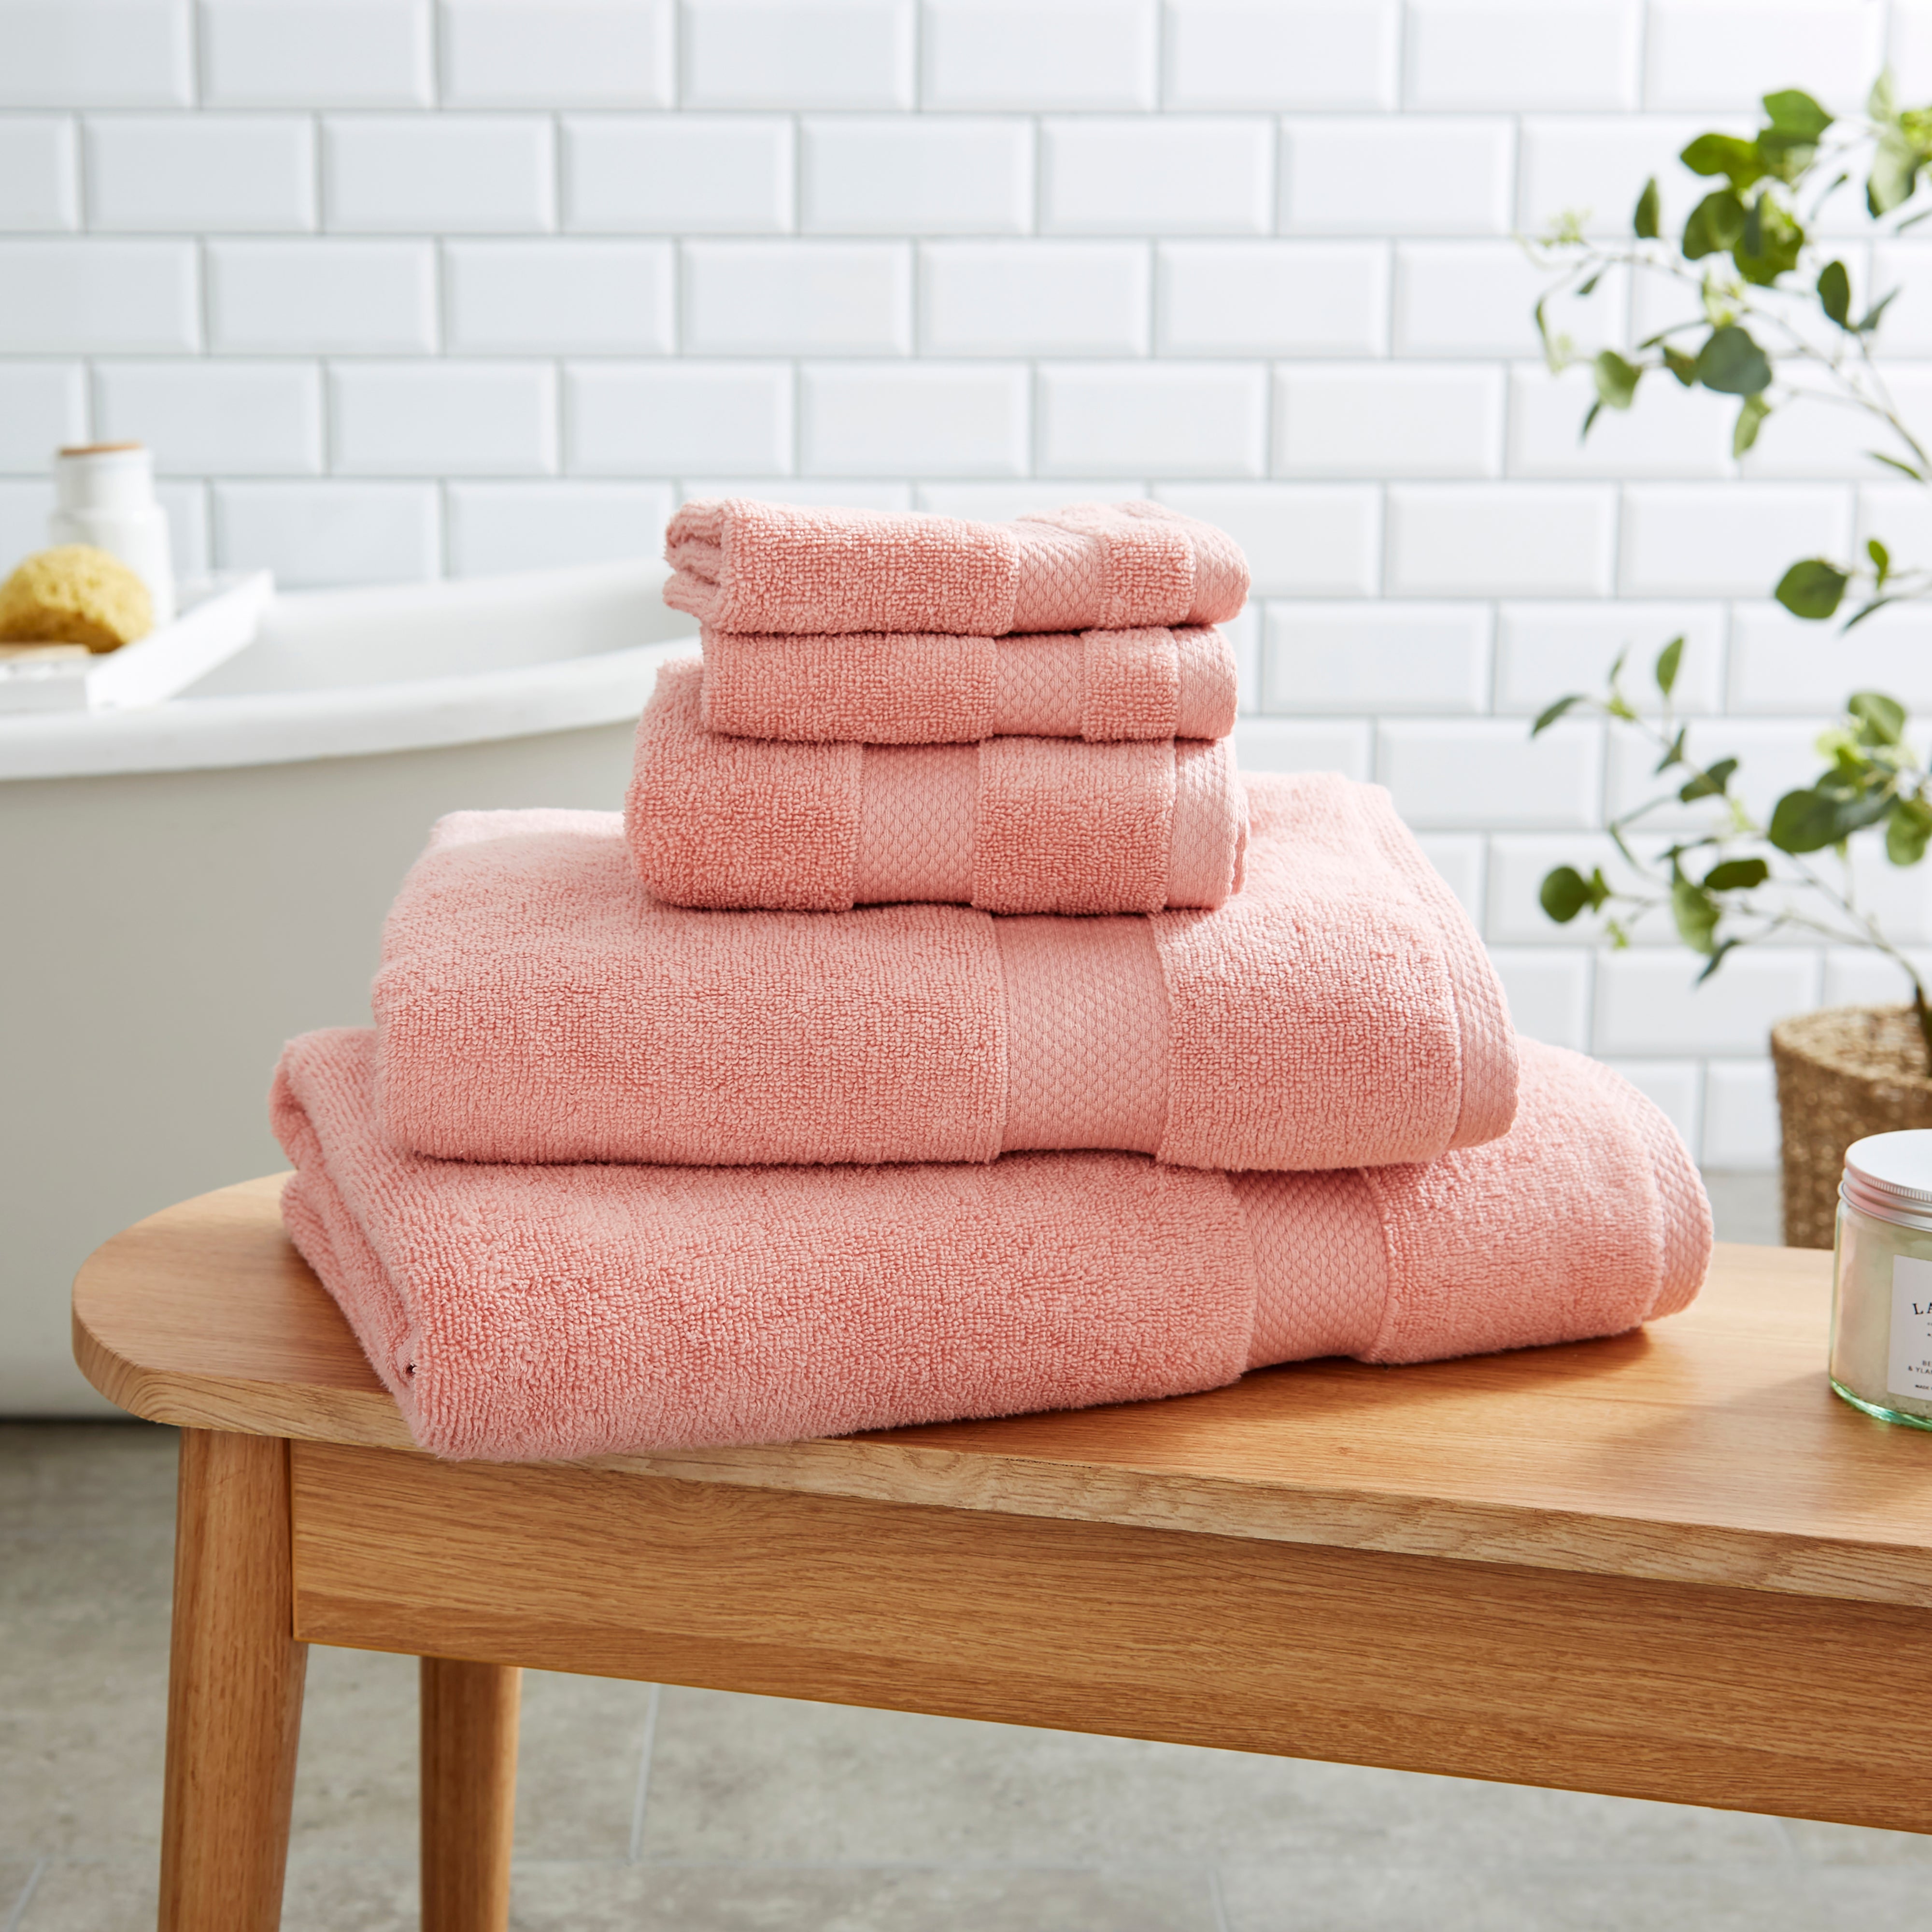 Soft and Fluffy 100% Cotton Coral Towel